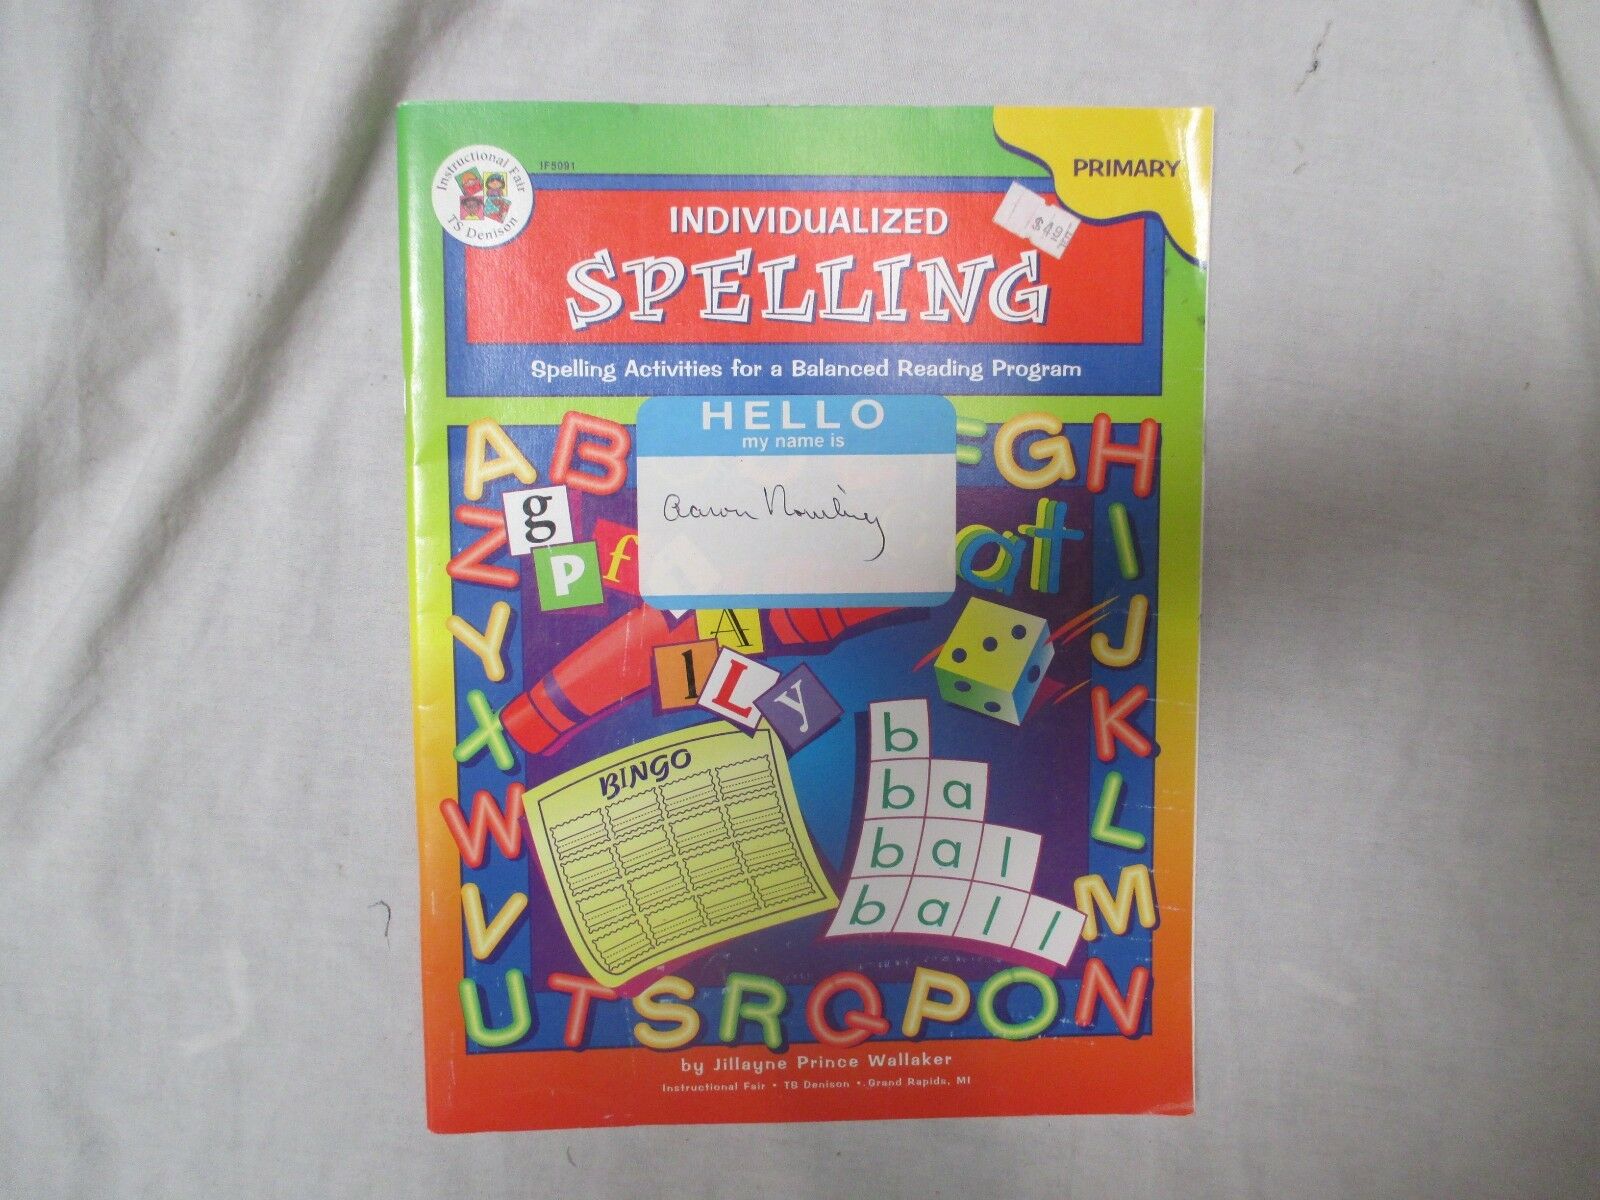 INDIVIDUALIZED SPELLING: SPELLING ACTIVITIES FOR A BALANCED READING PROGRAM